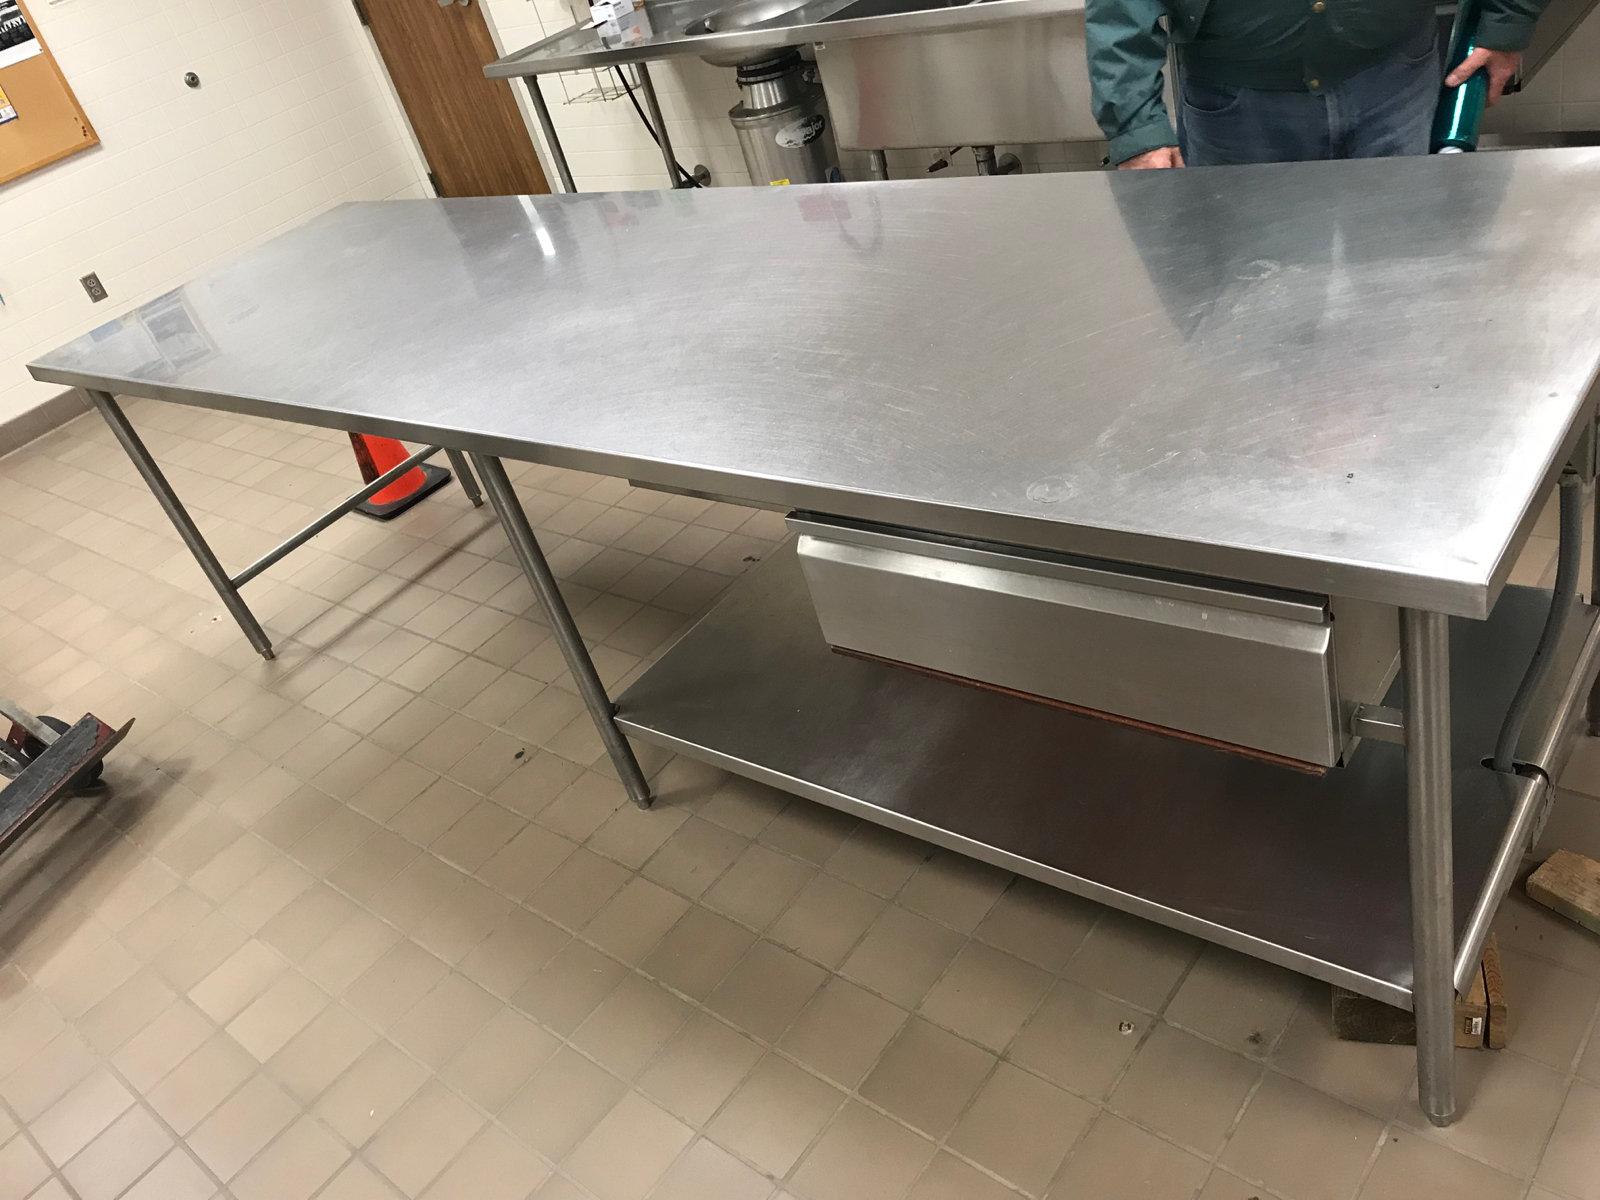 Approx 10 foot by 30 inch stainless steel table